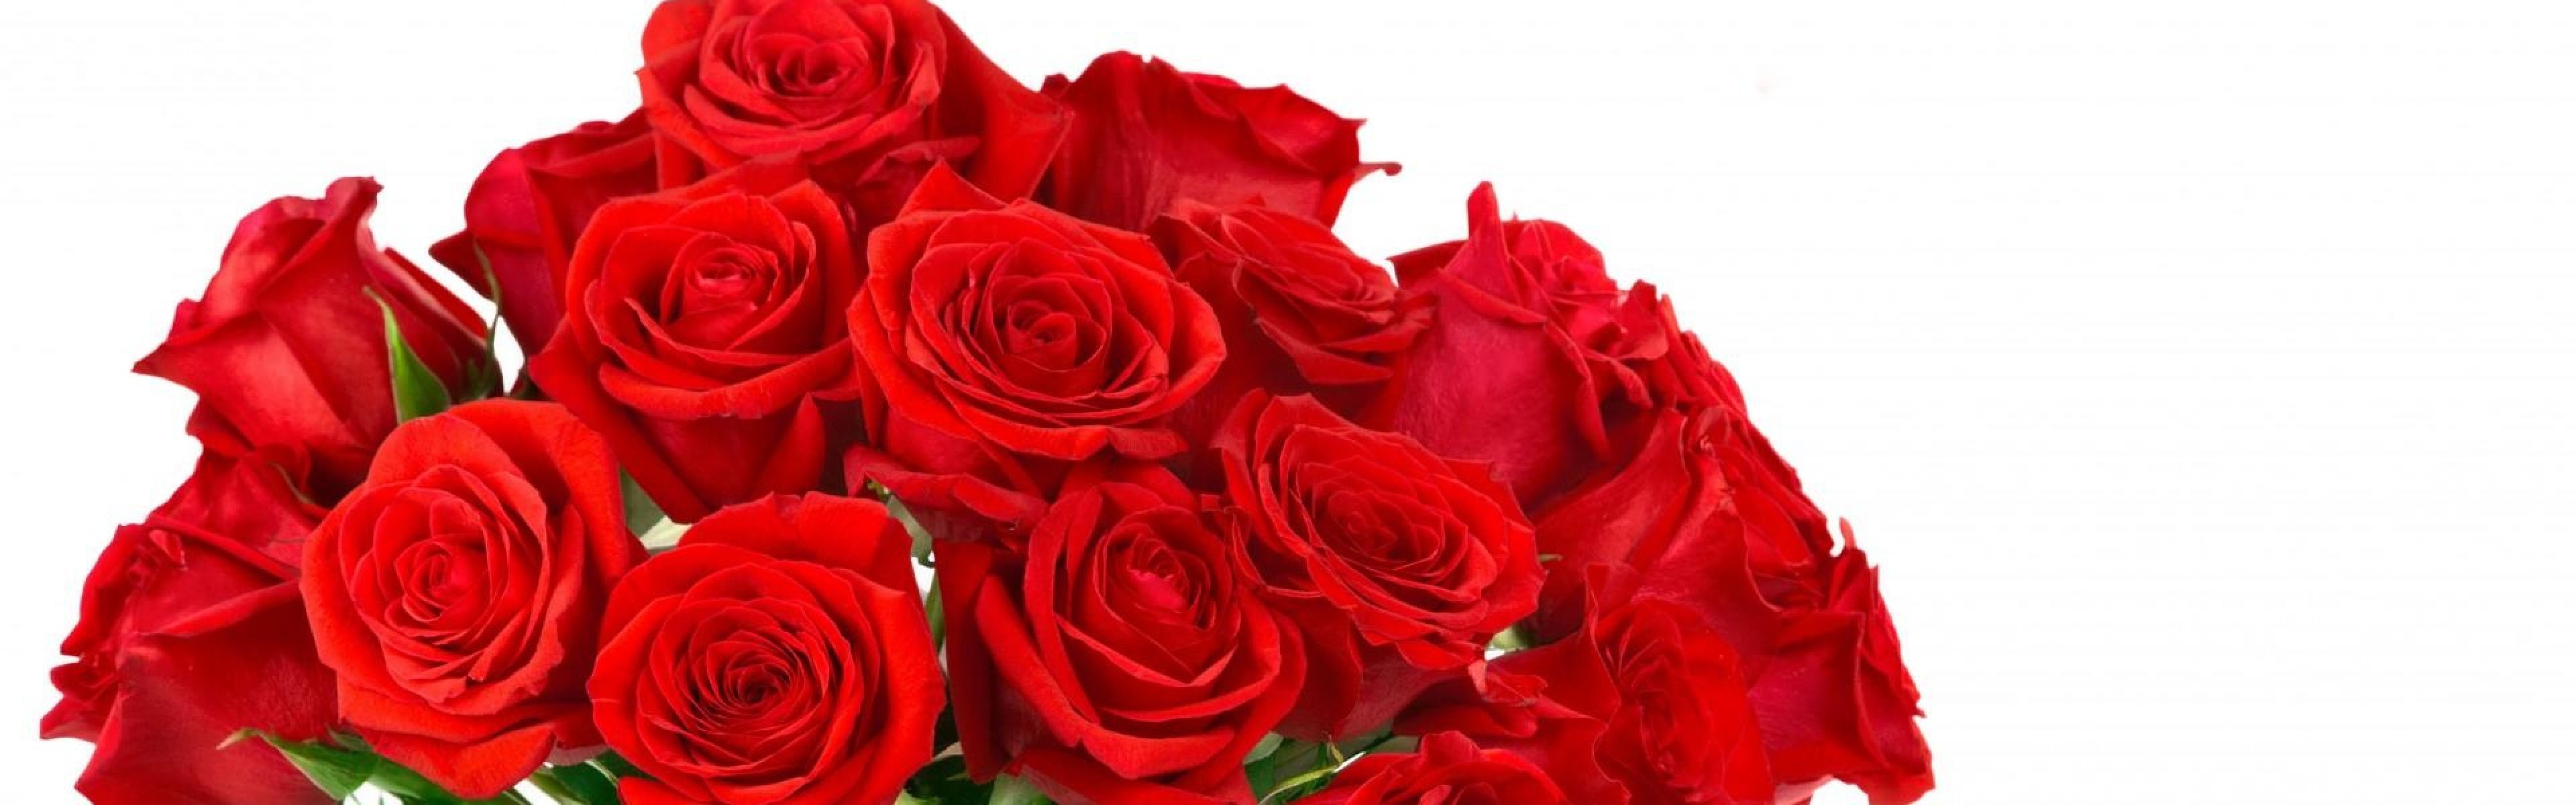 3840x1200  Wallpaper roses, flowers, bouquet, bright, red, white background,  inscription